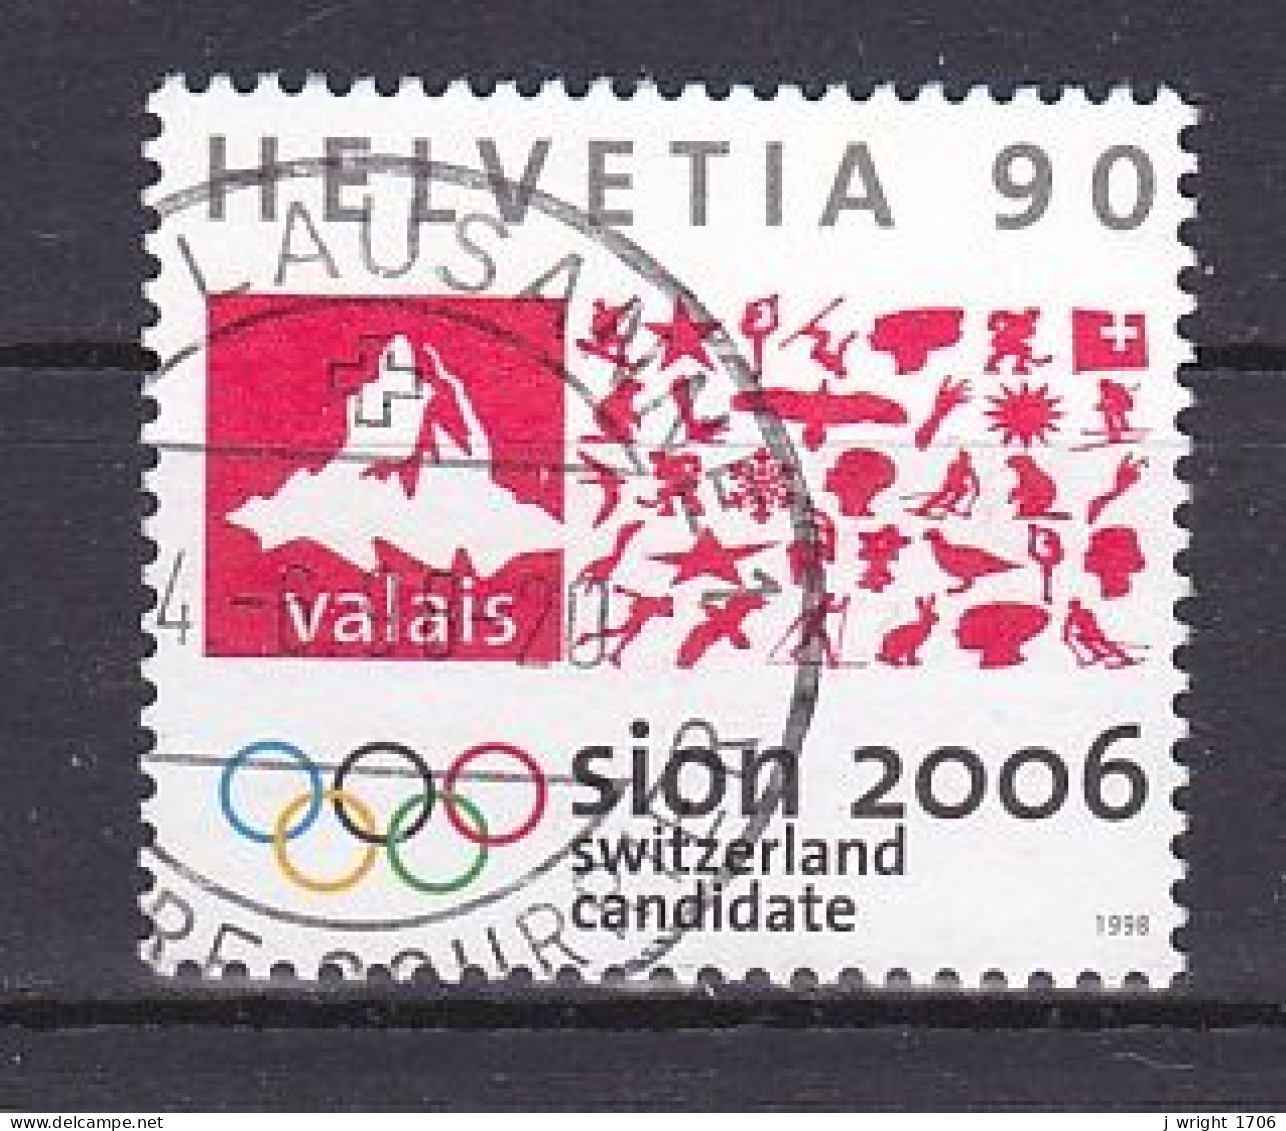 Switzerland, 1998, Winter Olympic Games Sion 2006, 90c, USED - Gebraucht